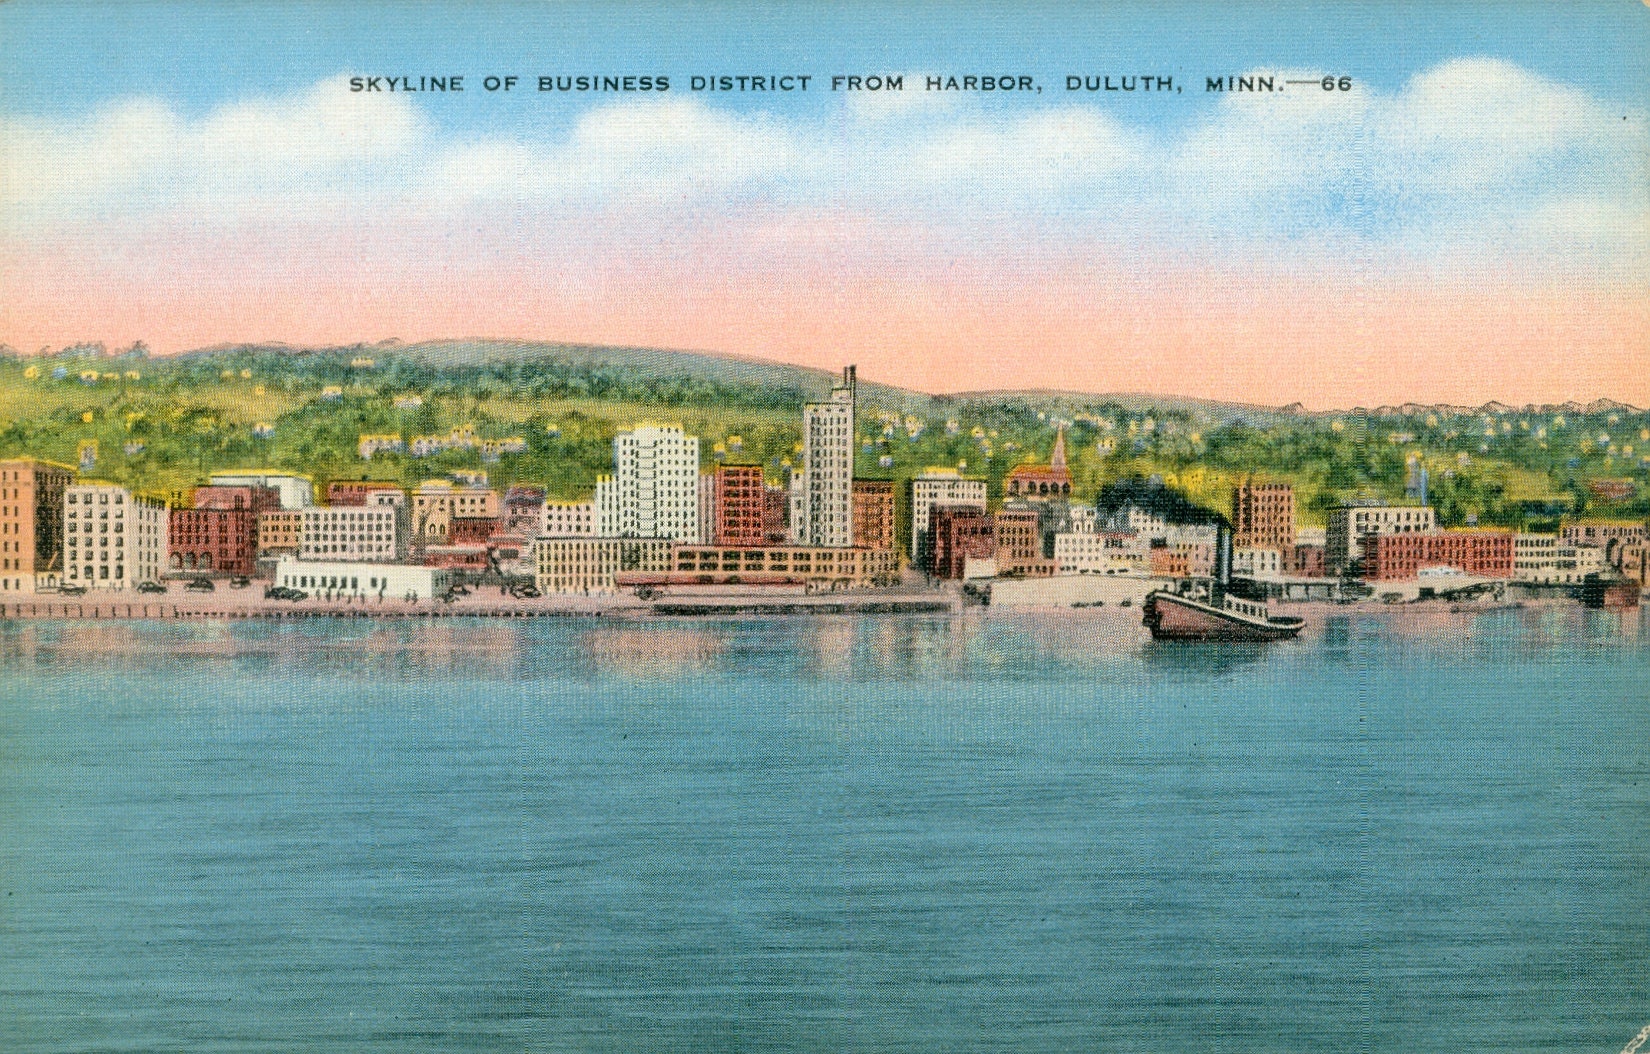 Postcard from the College of St. Scholastica, 1948 - Perfect Duluth Day